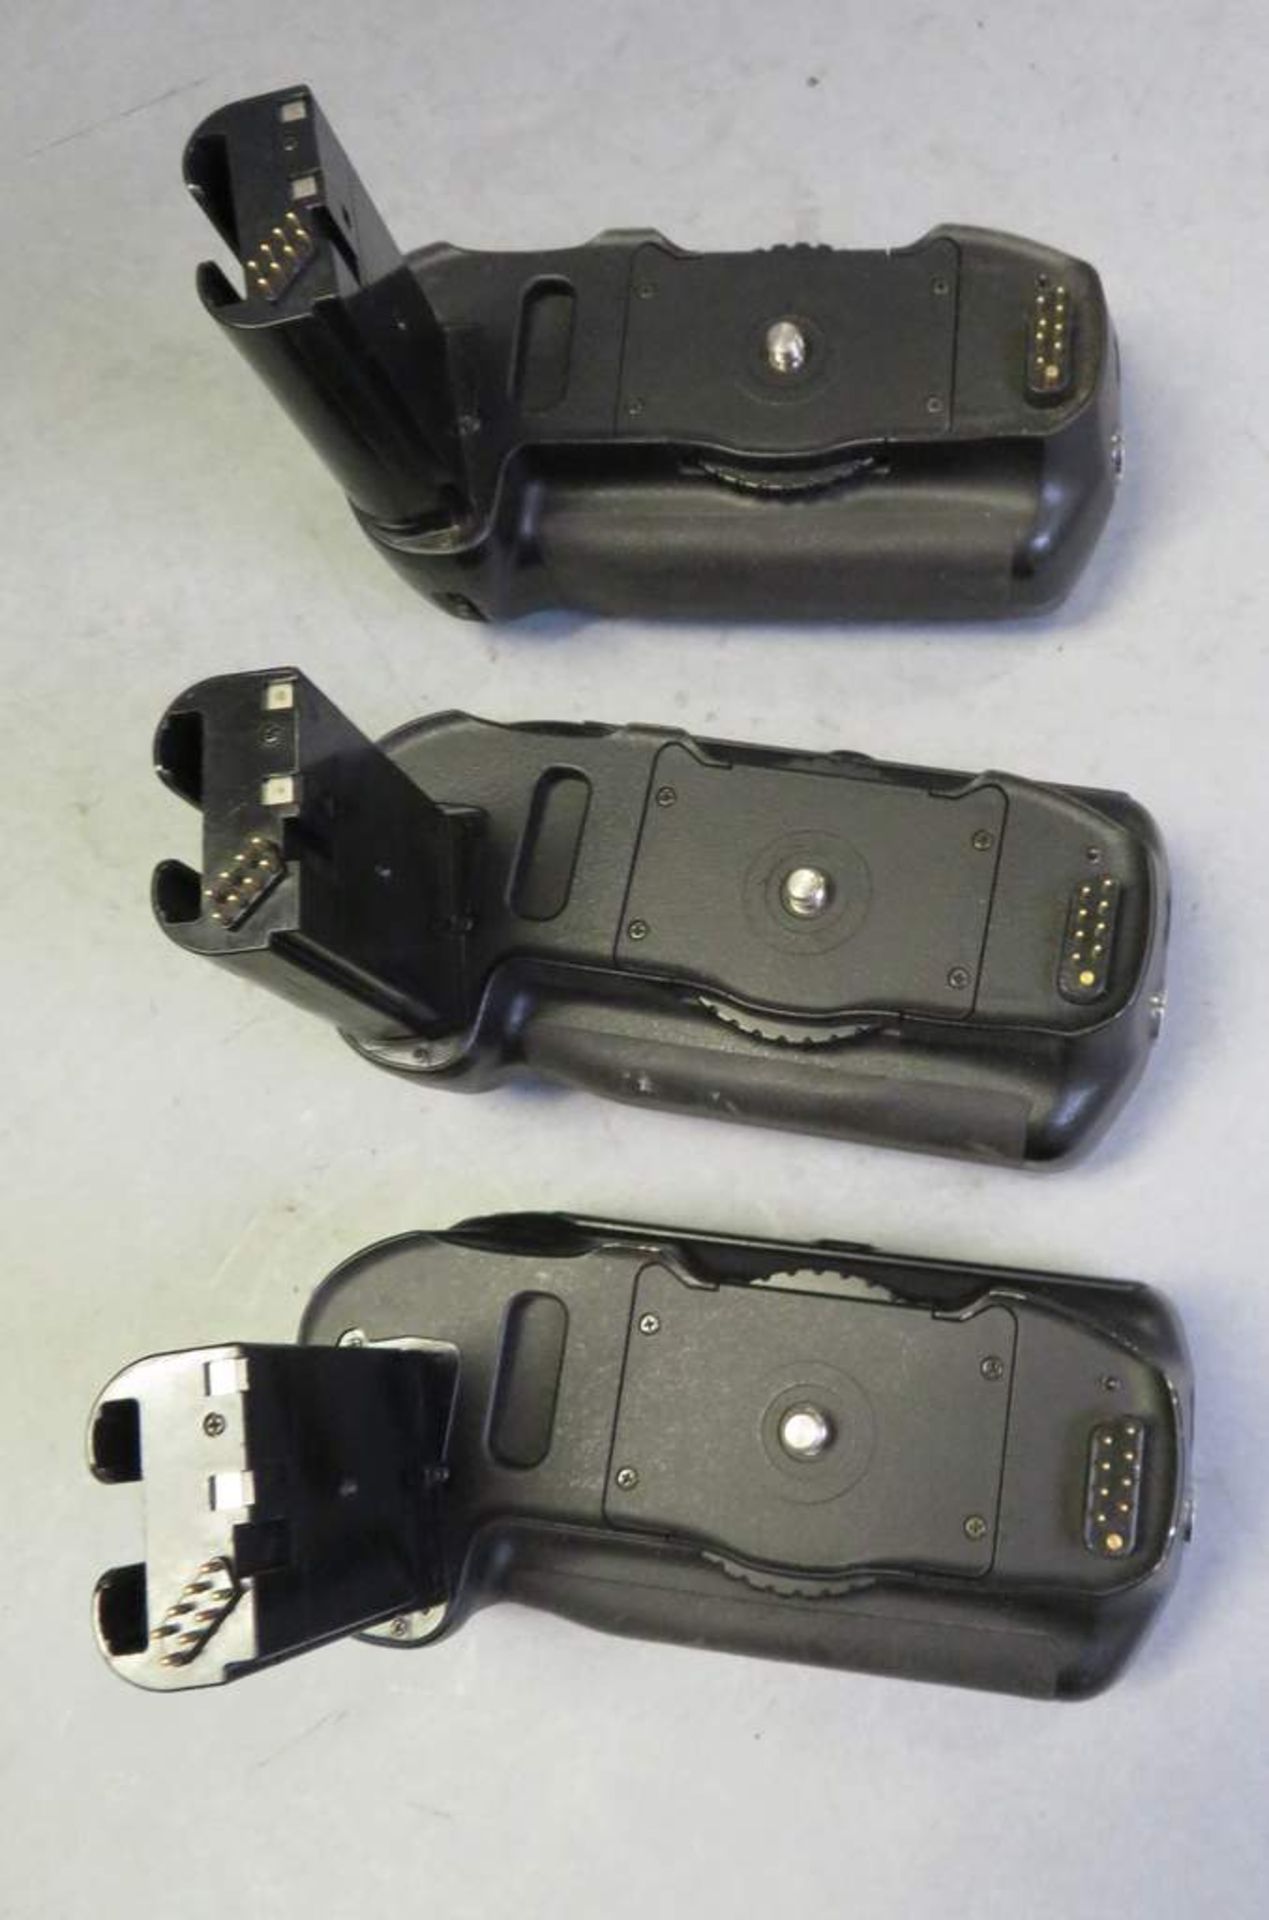 3x Nikon MB-D 100 Battery attachments - Image 2 of 4